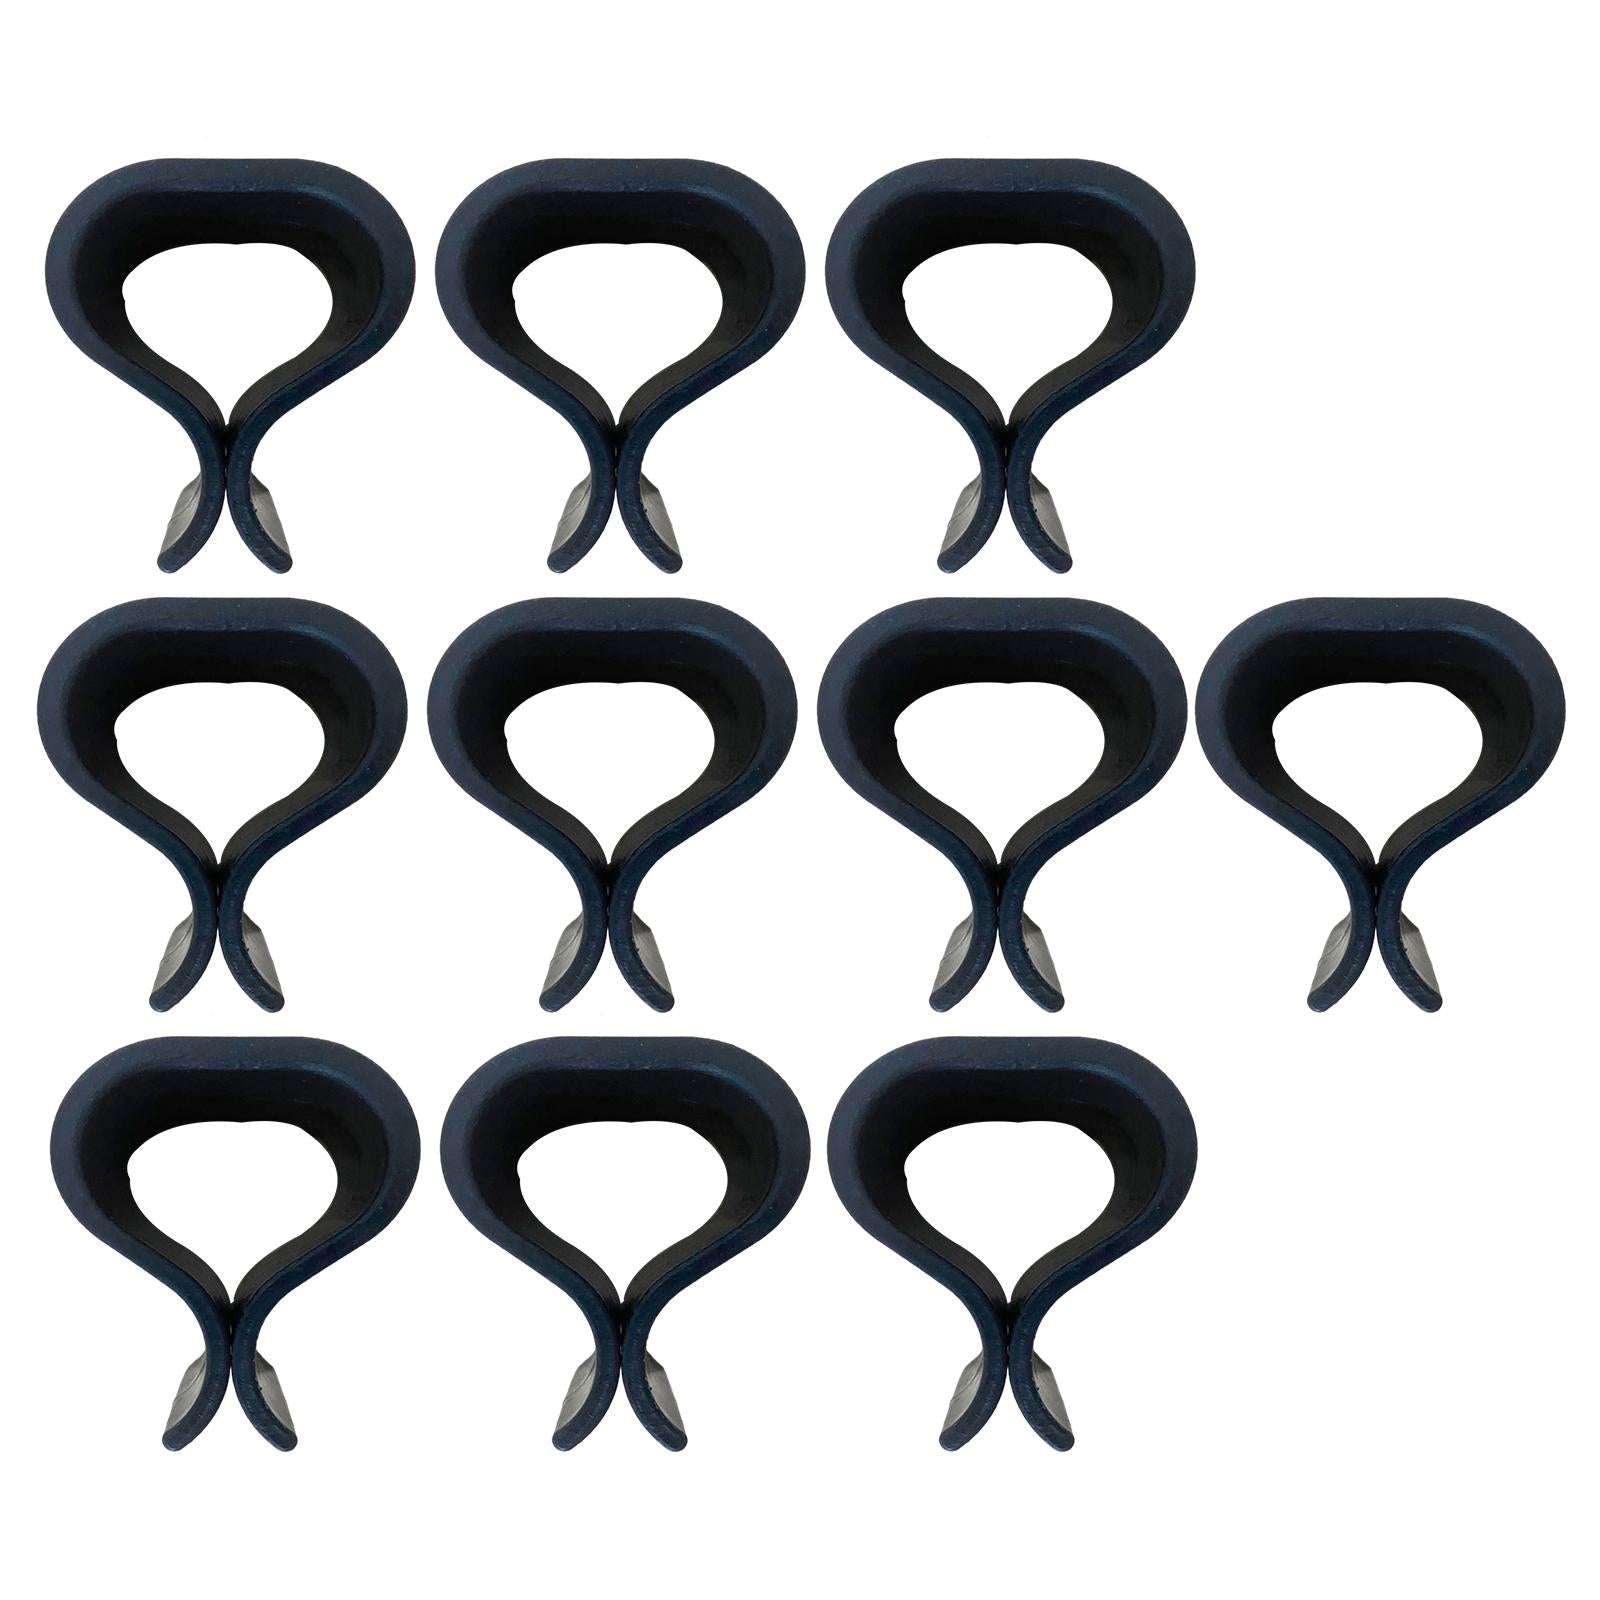 10 Pieces Patio Wicker Furniture Clips Chair Fasteners Patio Sofa Clips 5x6.2cm